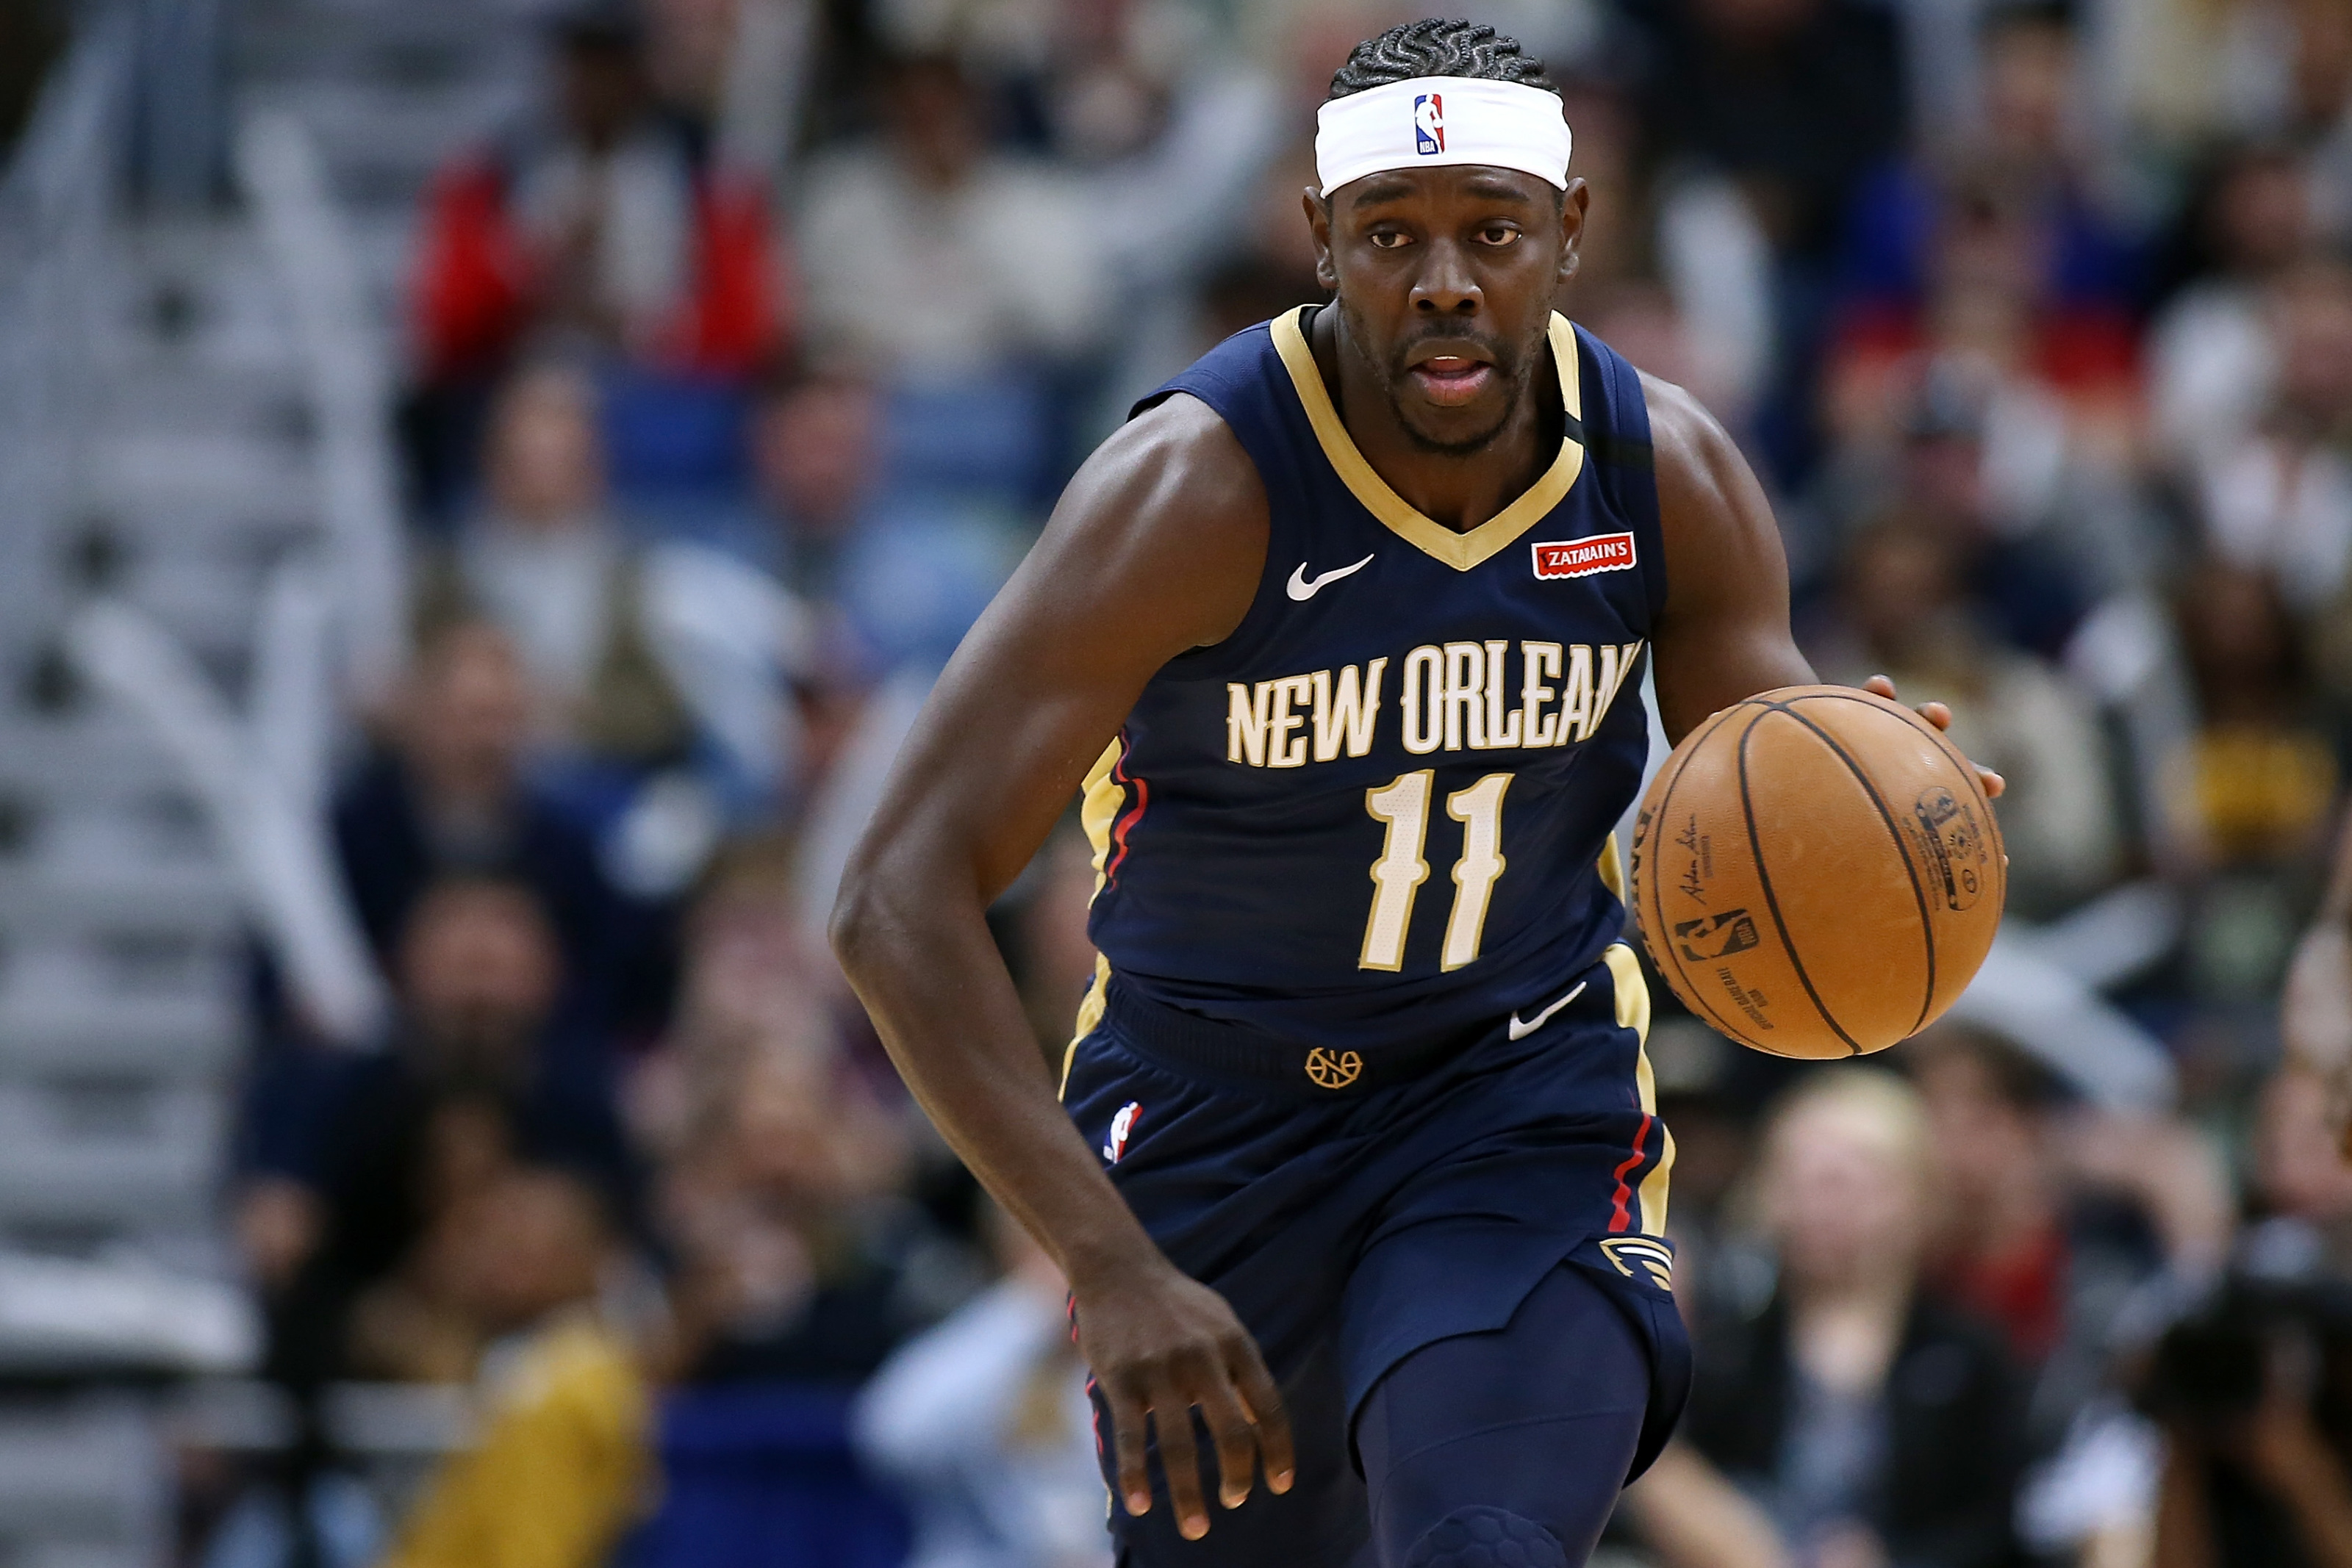 The New Orleans Pelicans Have Their BEST Roster in Franchise